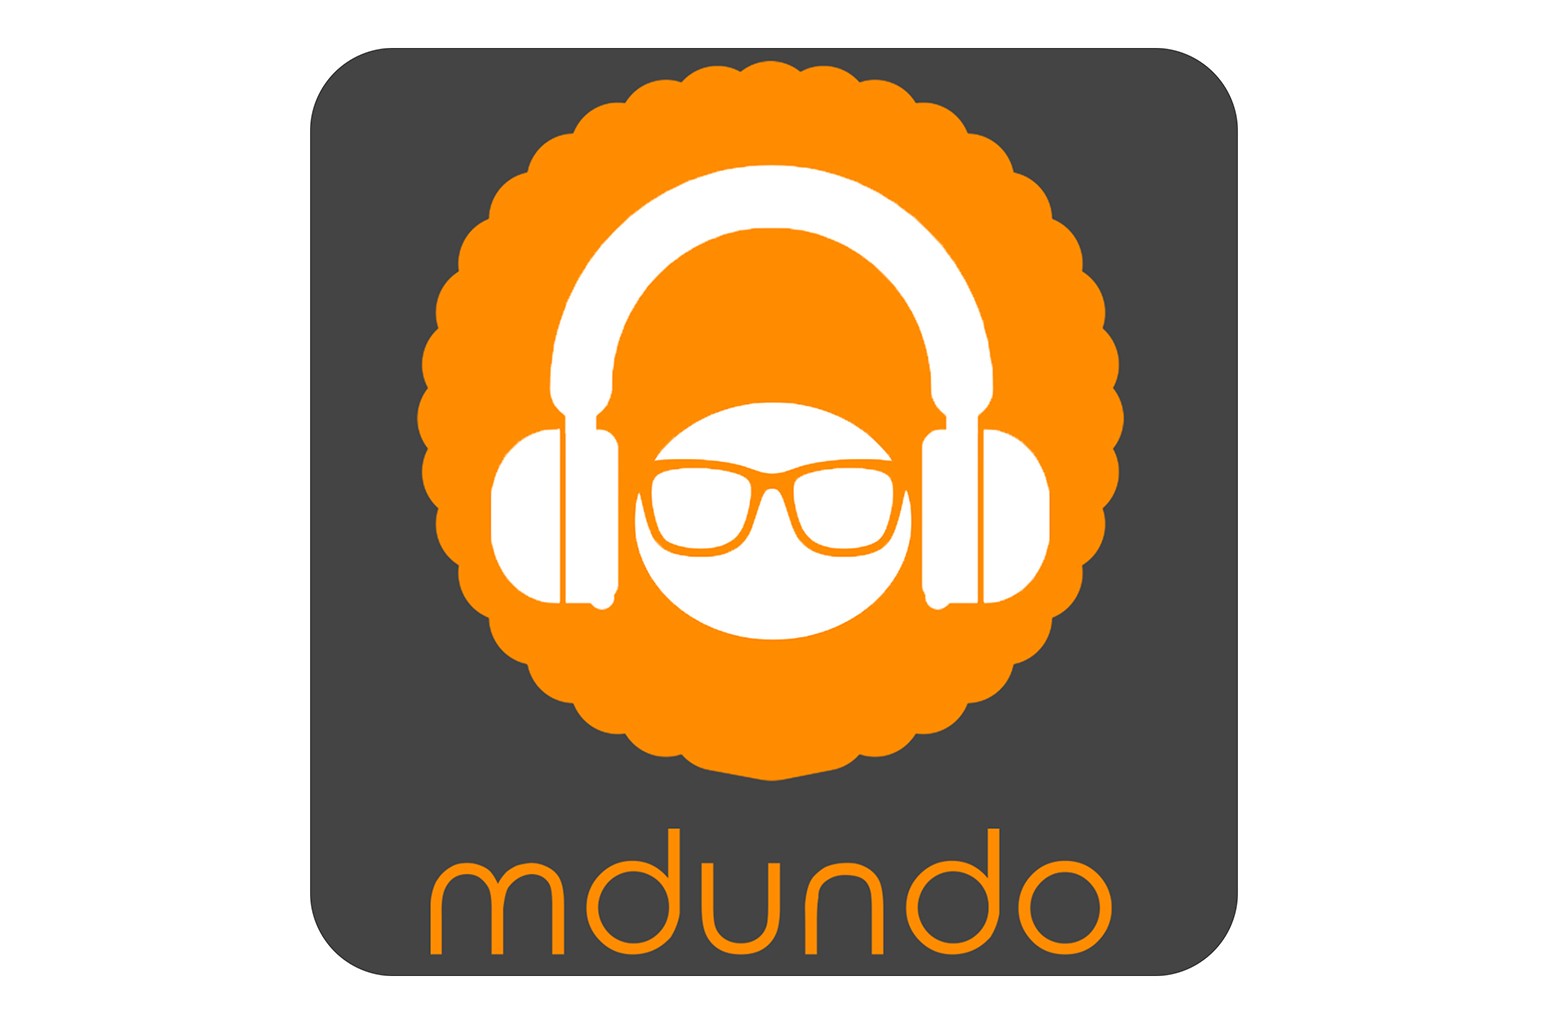 MDUNDO has 7M monthly active users from 5M in June